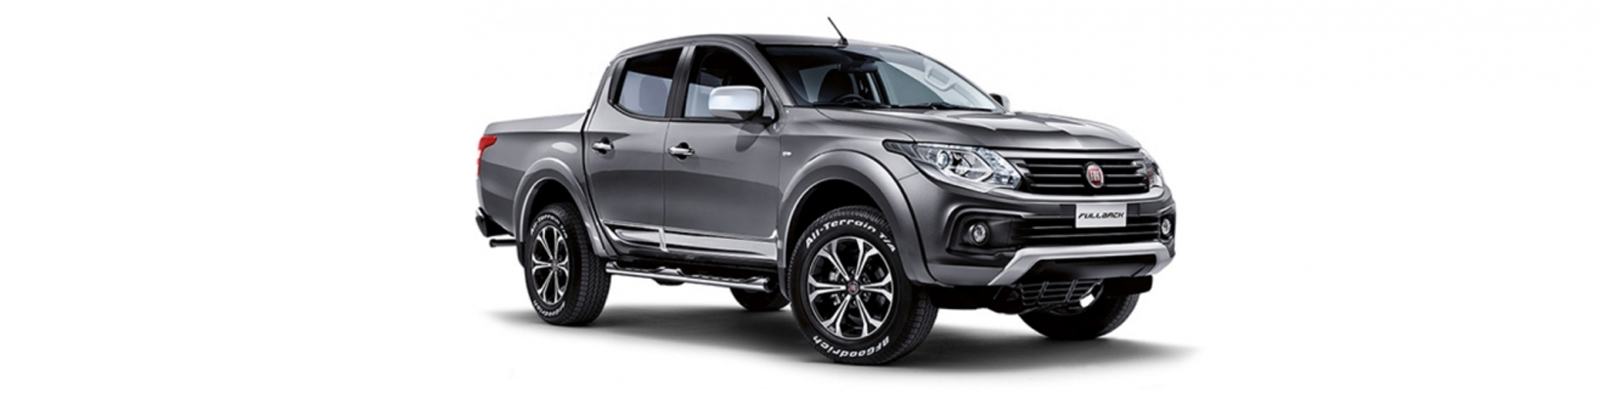 Accessories For Fiat Fullback Double Cab 2016 On